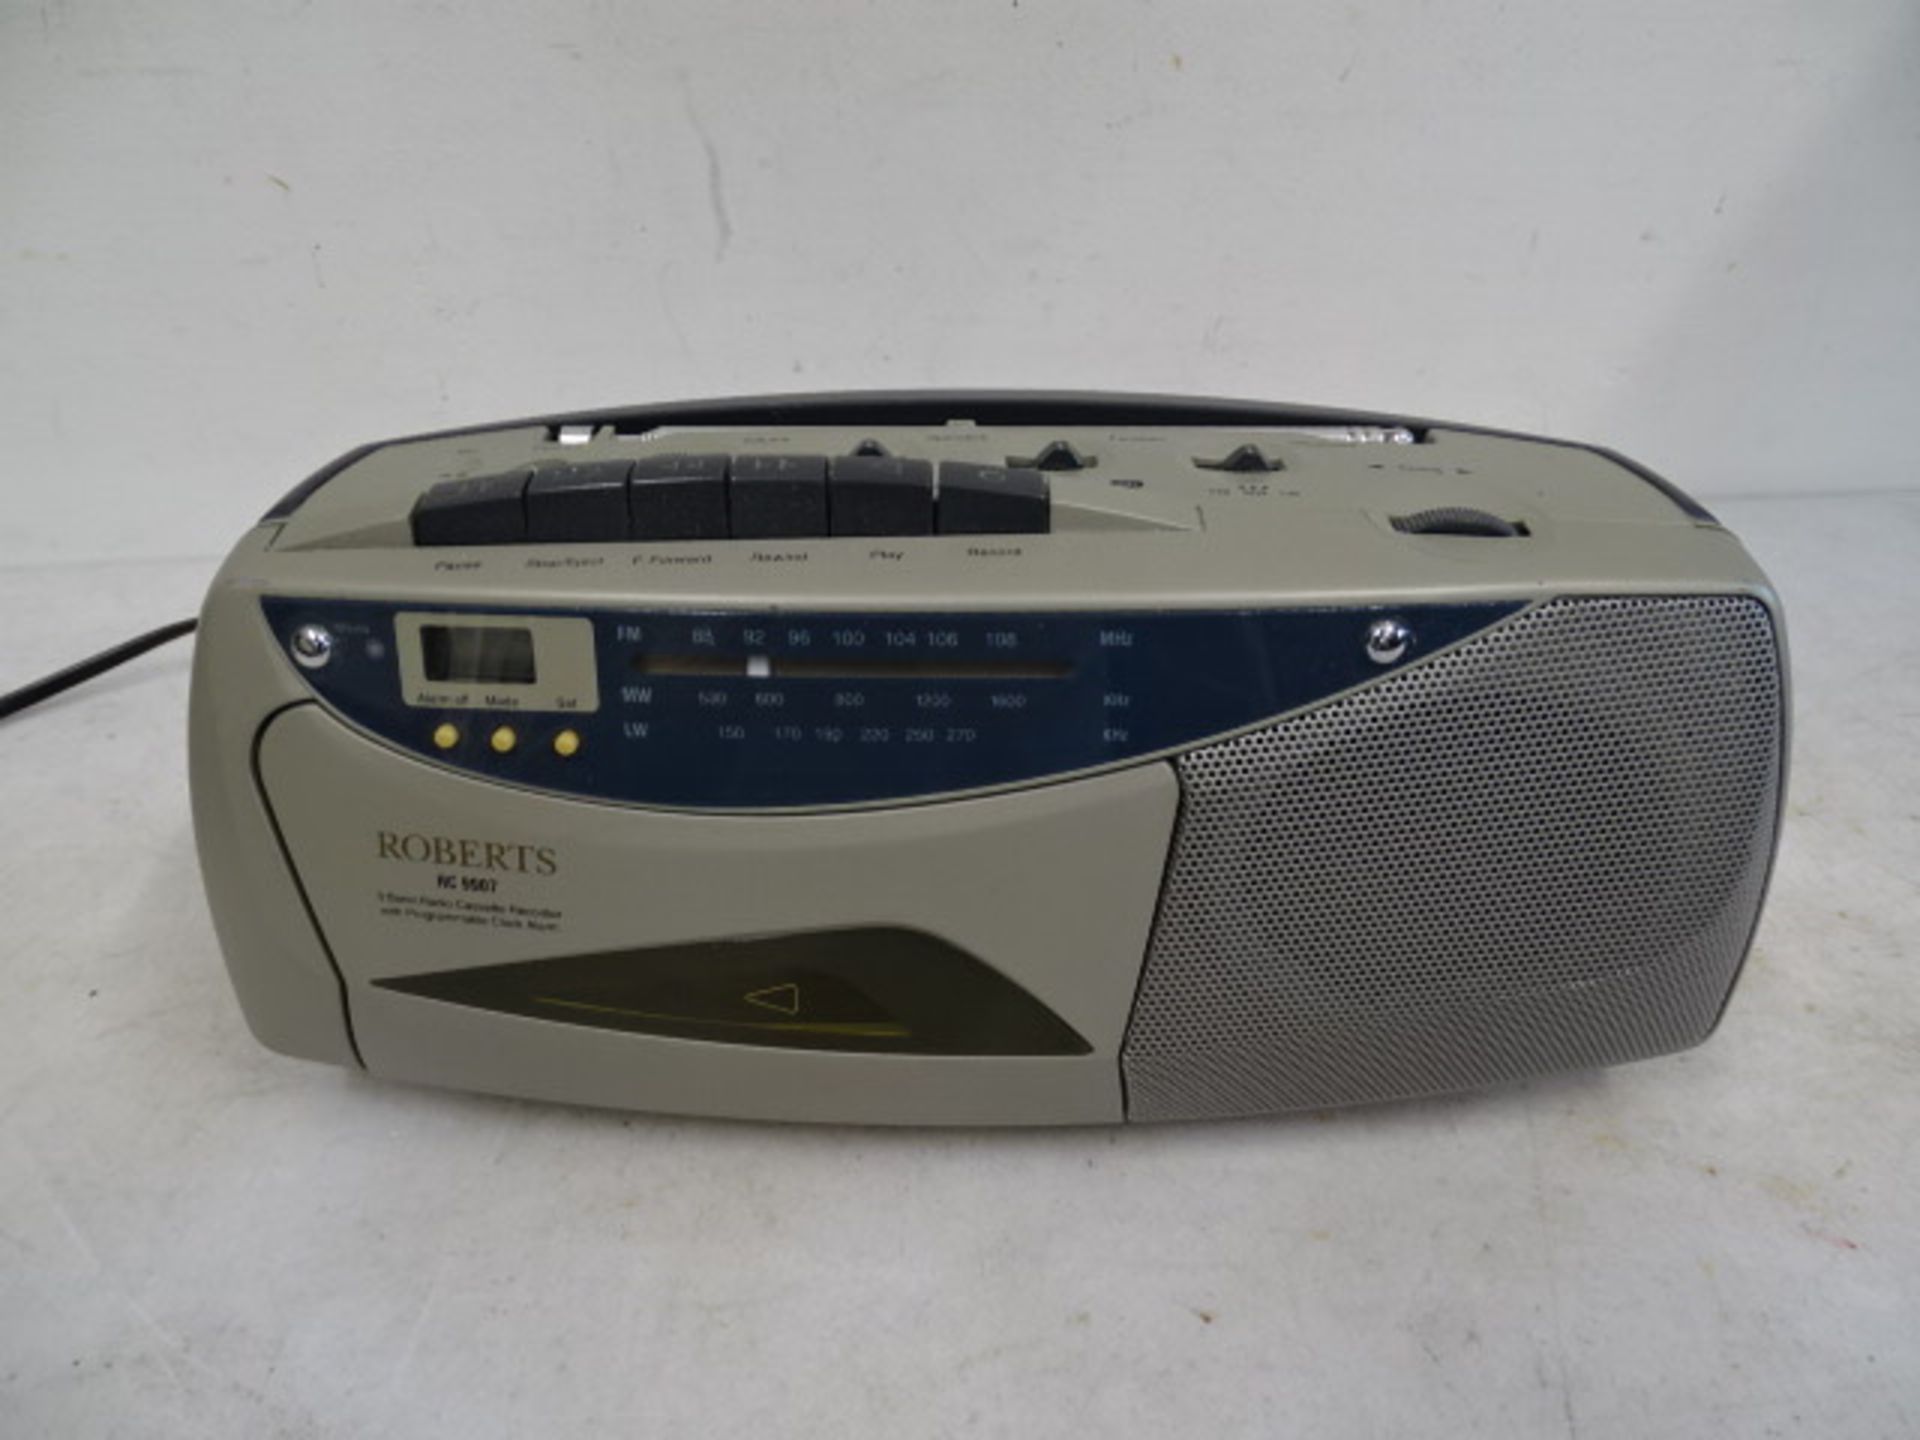 Vintage Roberts radio/cassette player from a house clearance